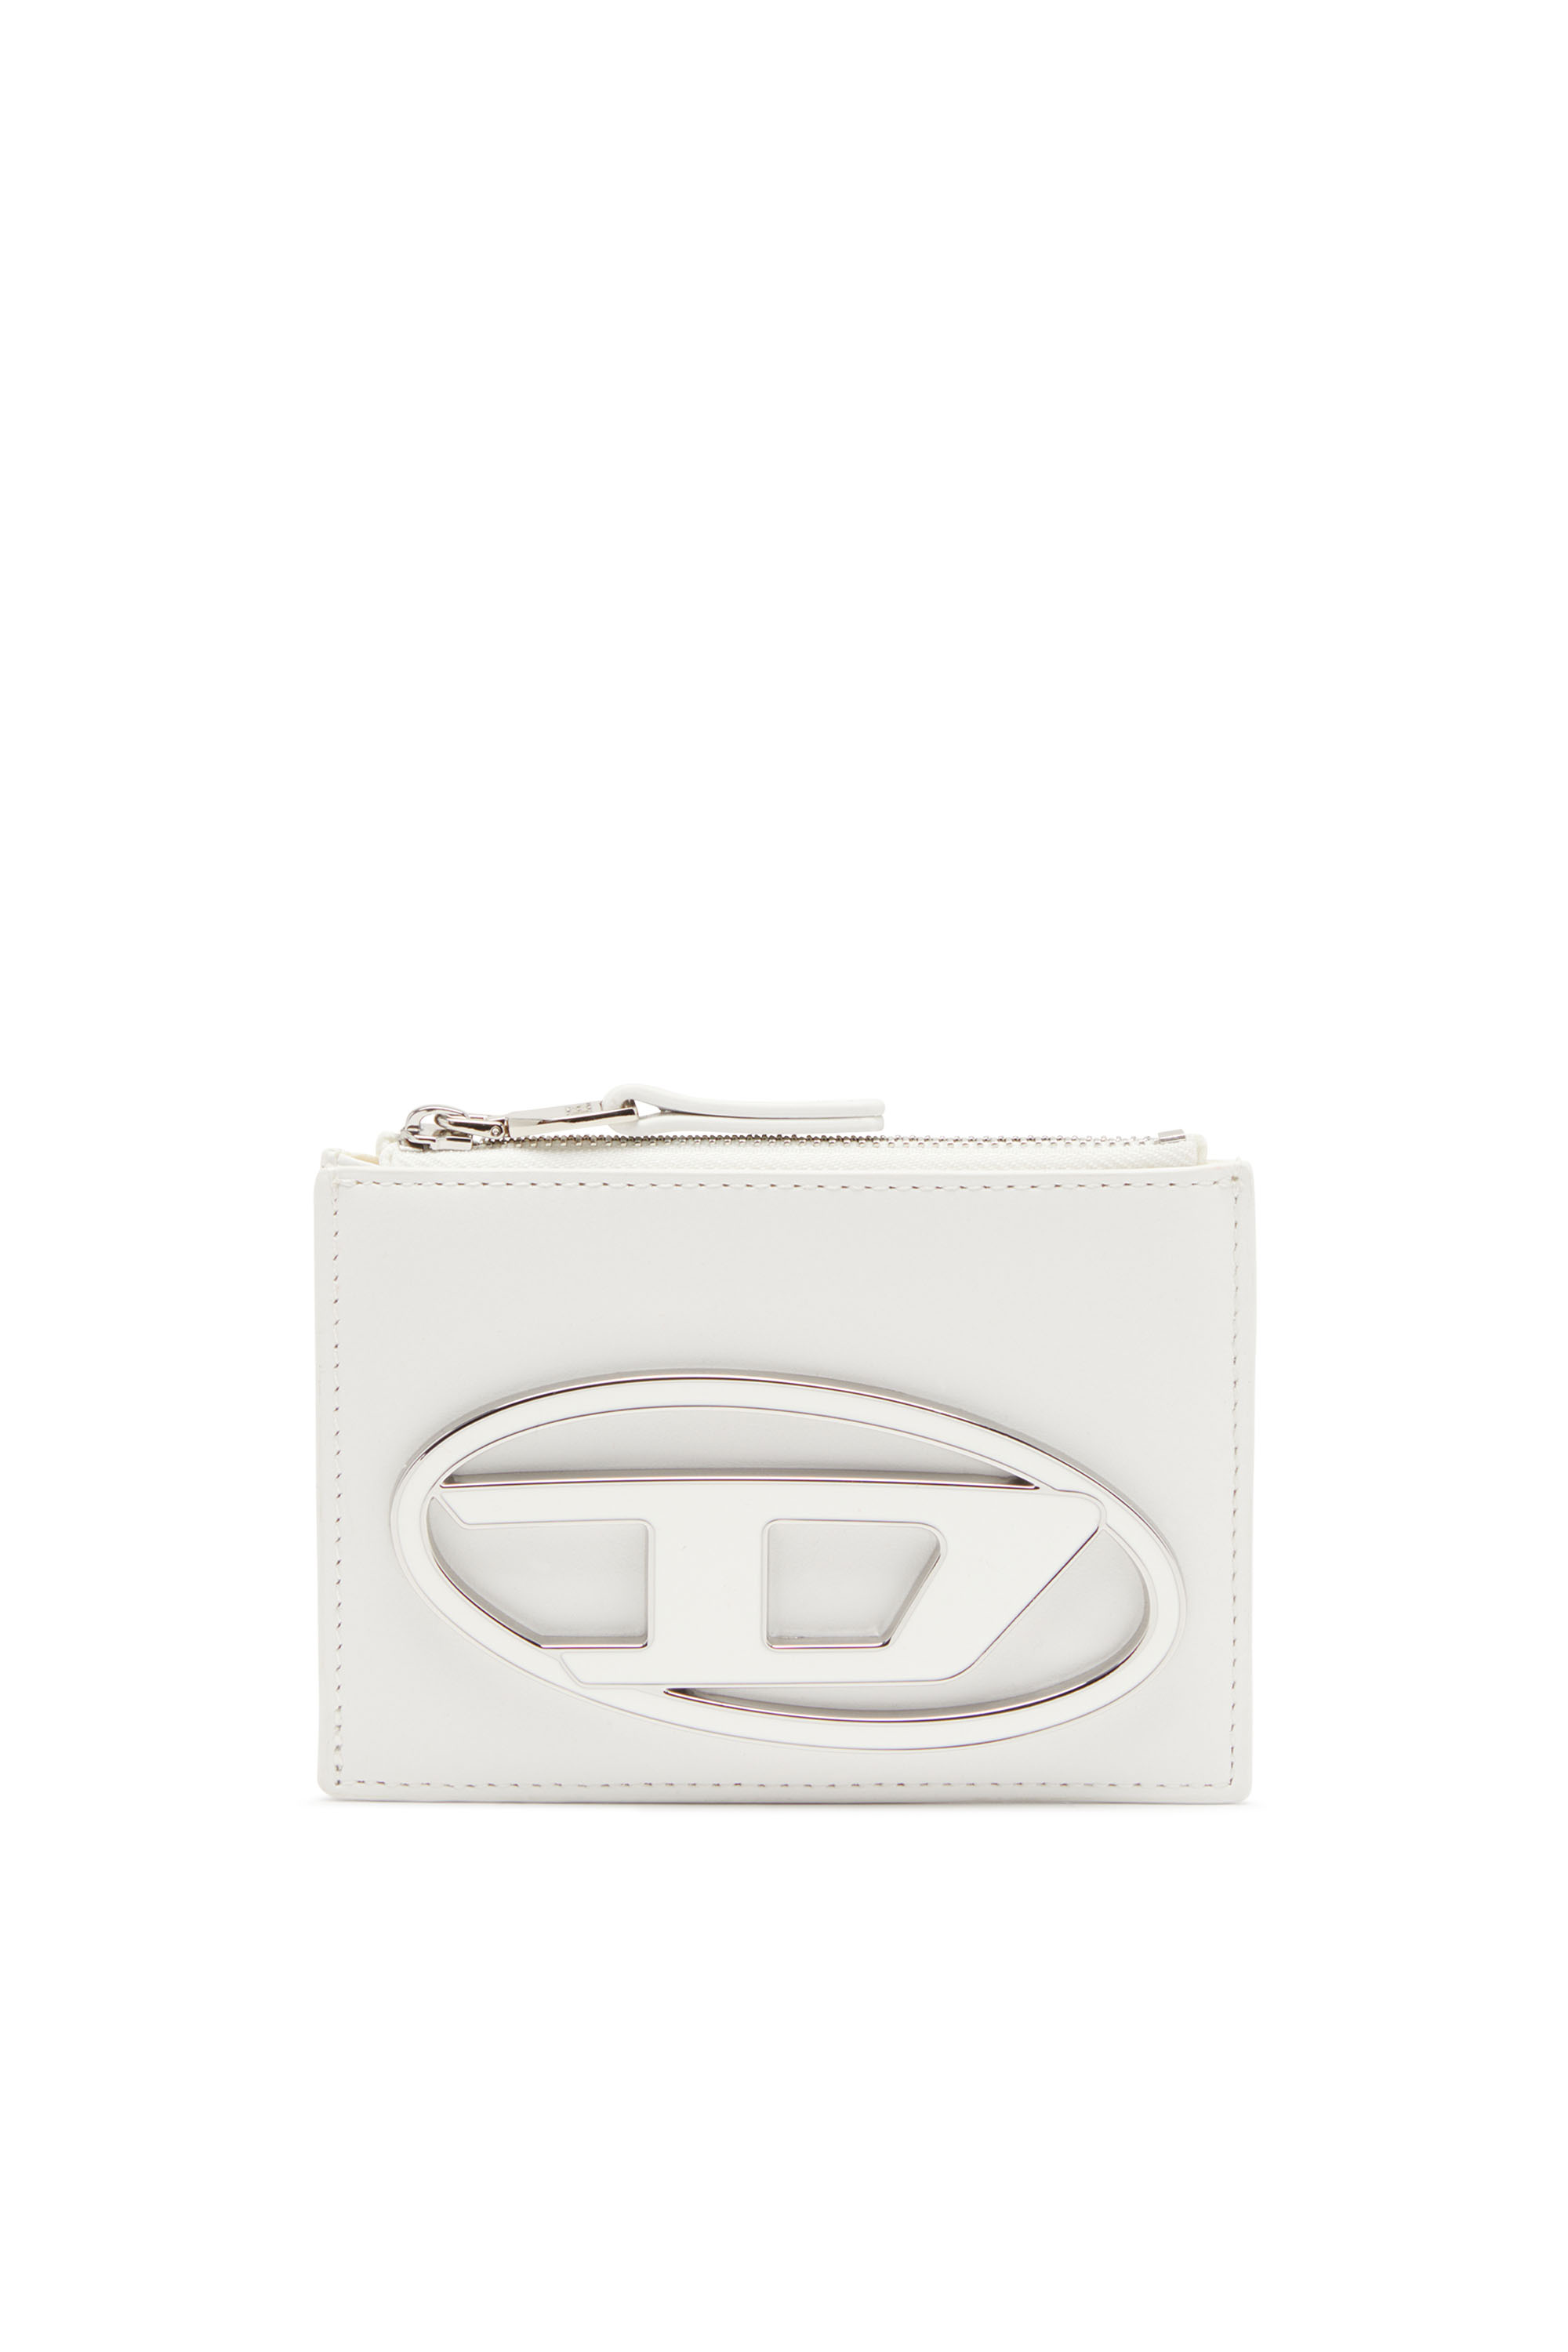 Diesel - 1DR CARD HOLDER I, Woman Card holder in leather in White - Image 1